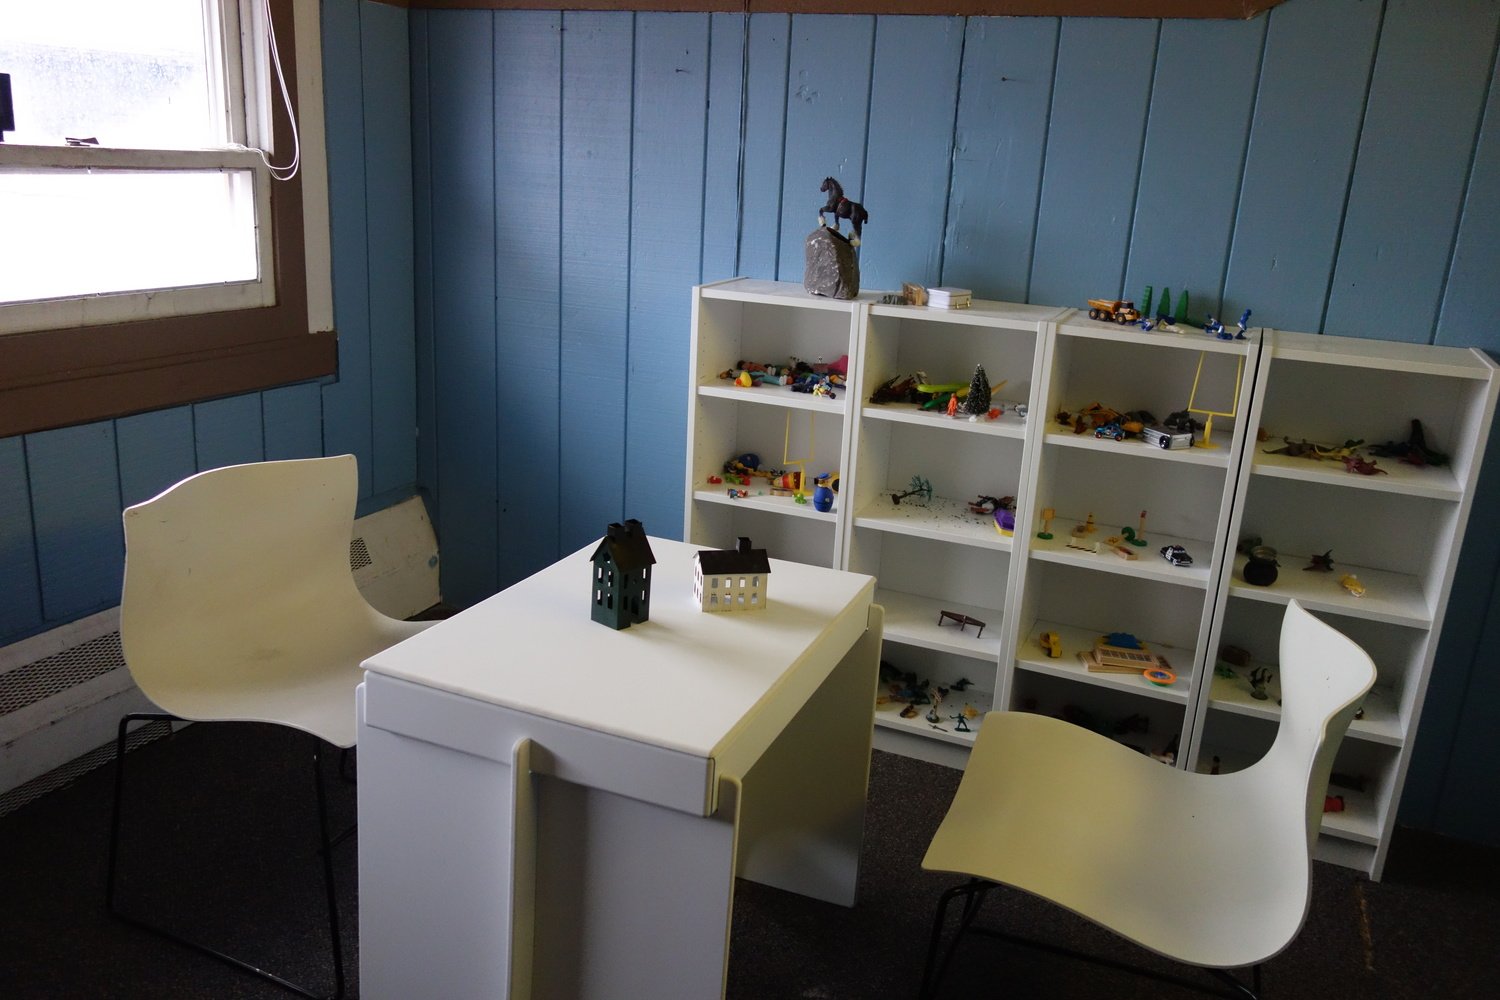 Special play therapy rooms are available for use by therapists.